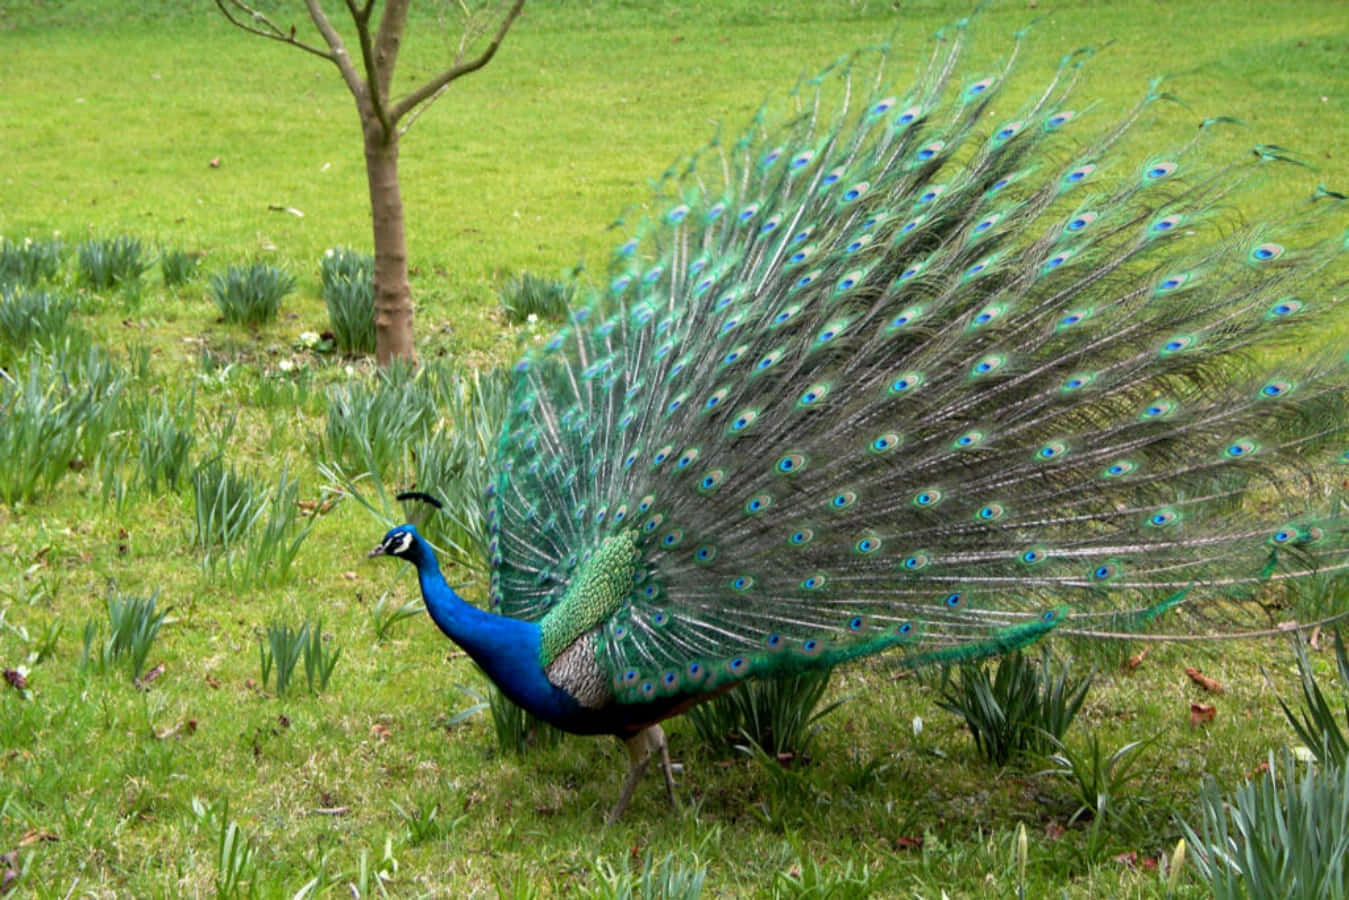 The Majestic Blue Peacock